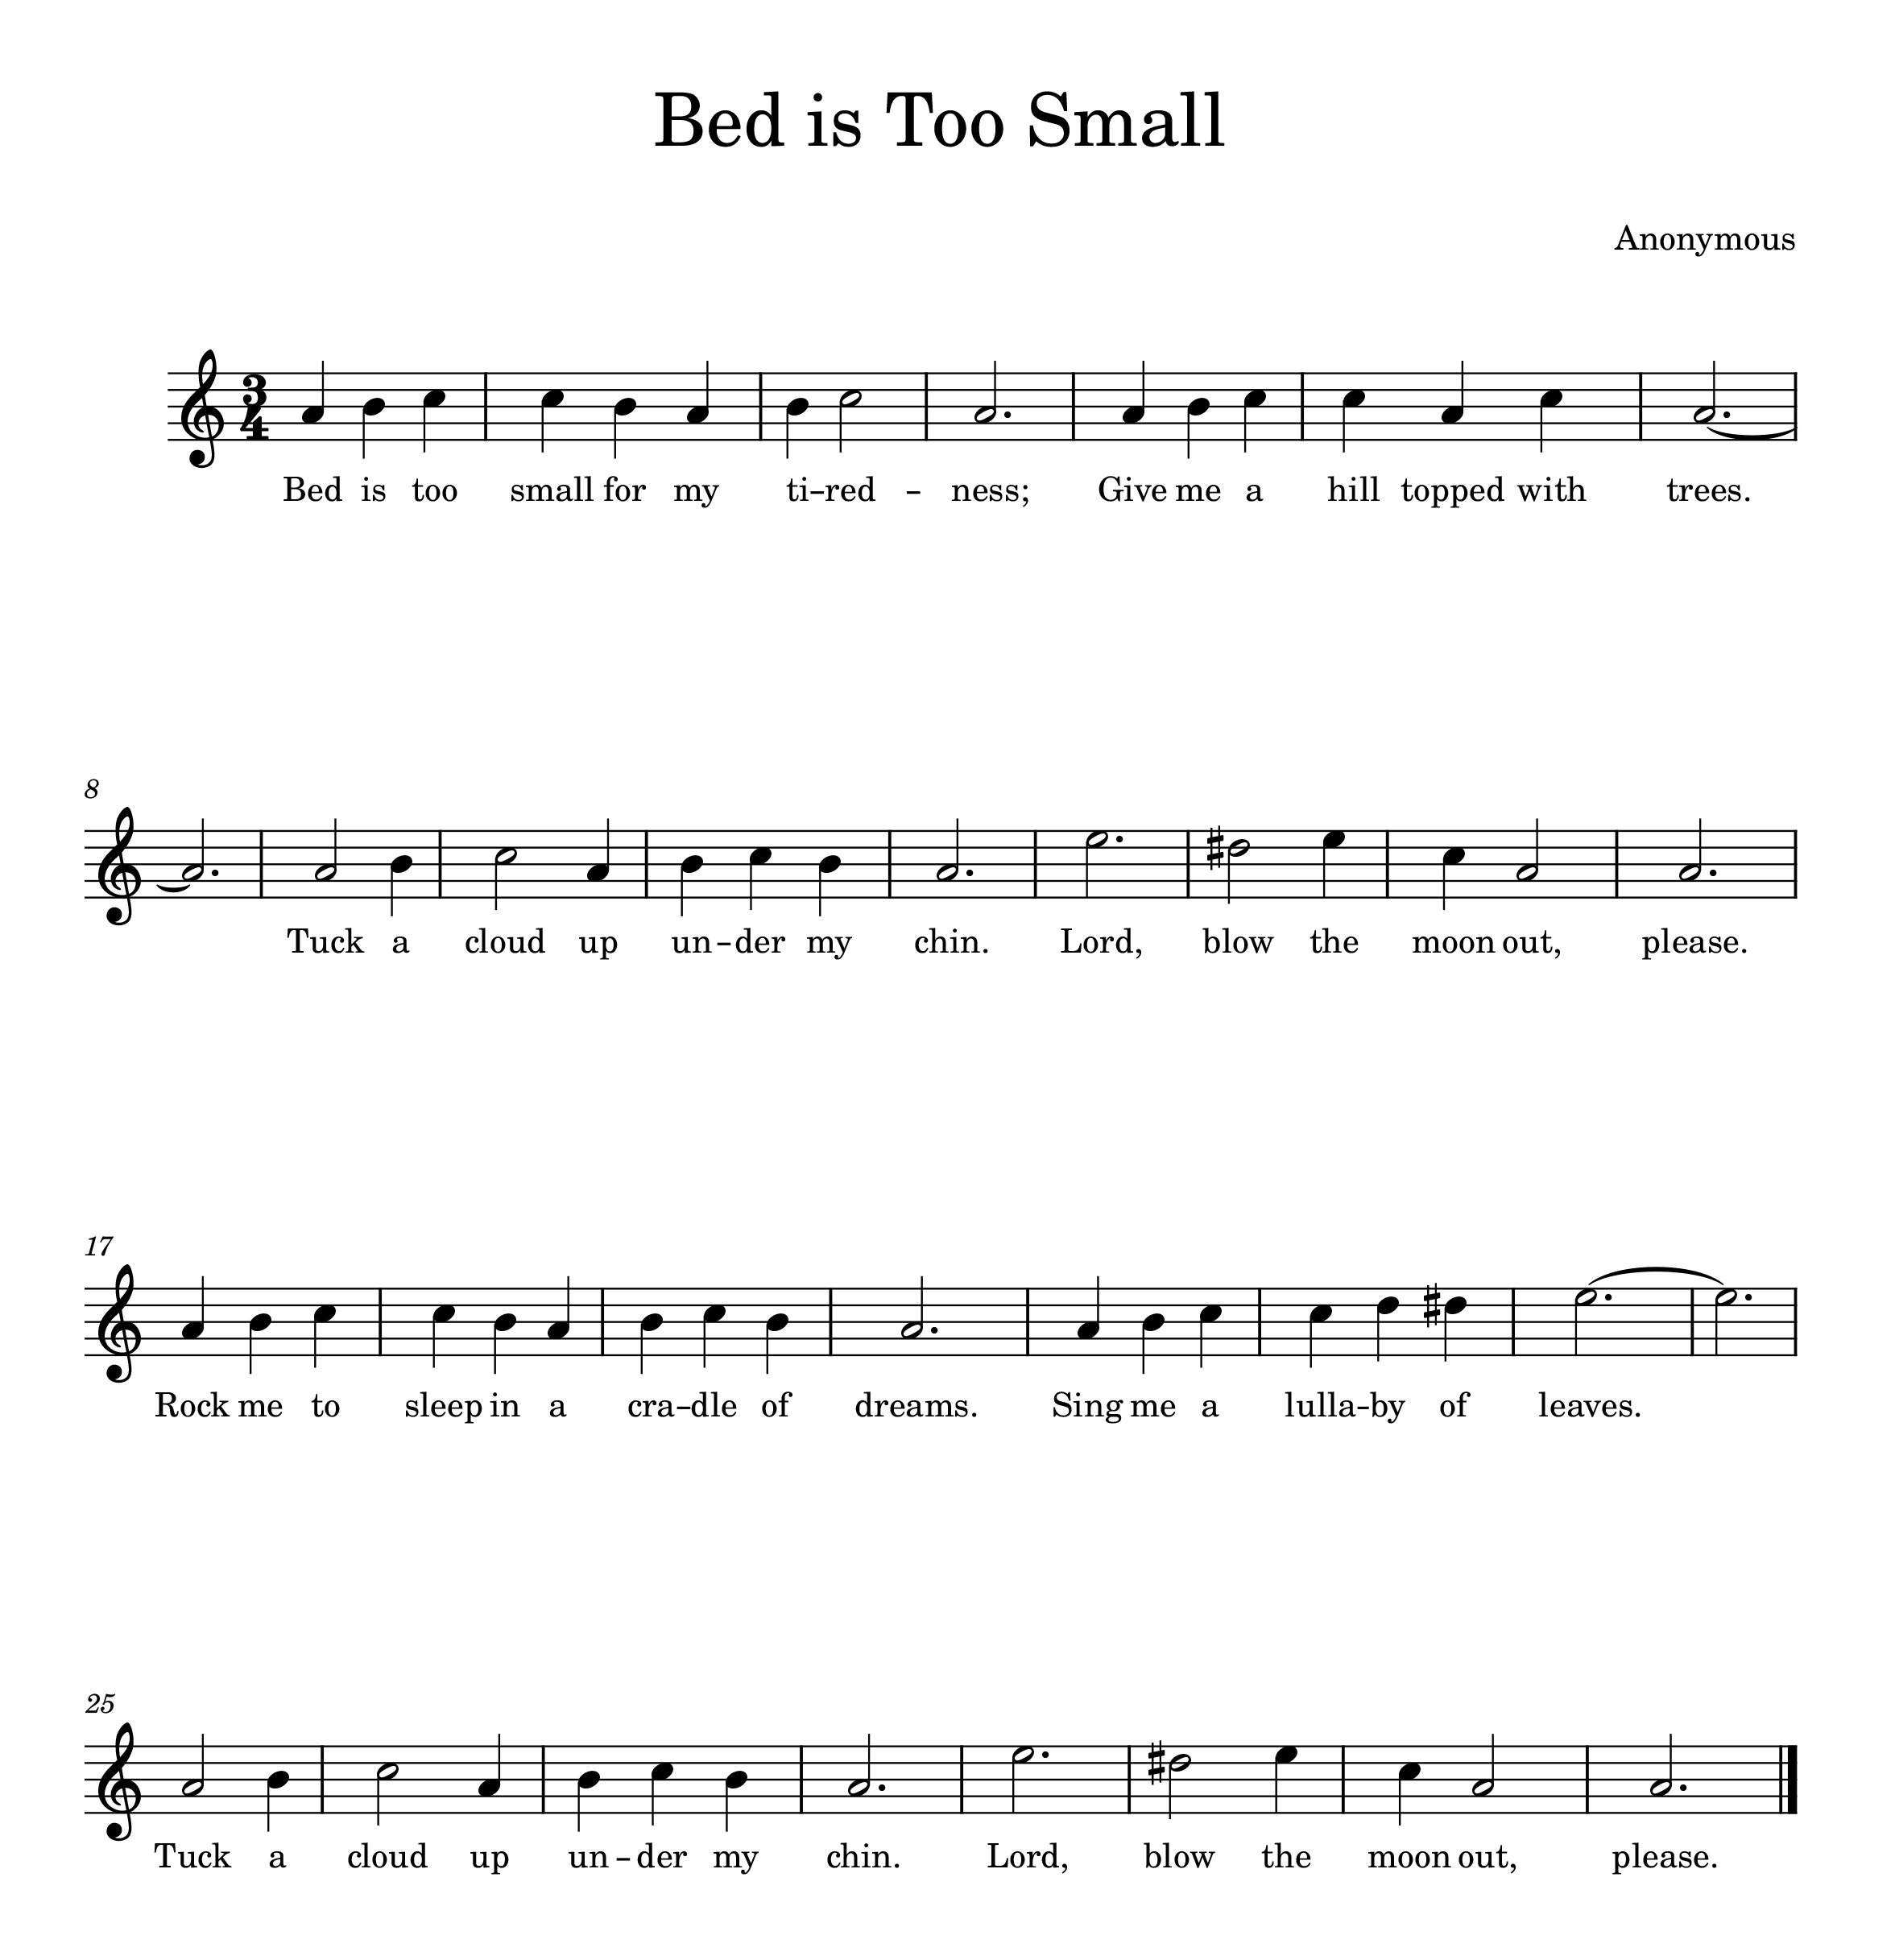 Sheet music for "Bed Is Too Small"